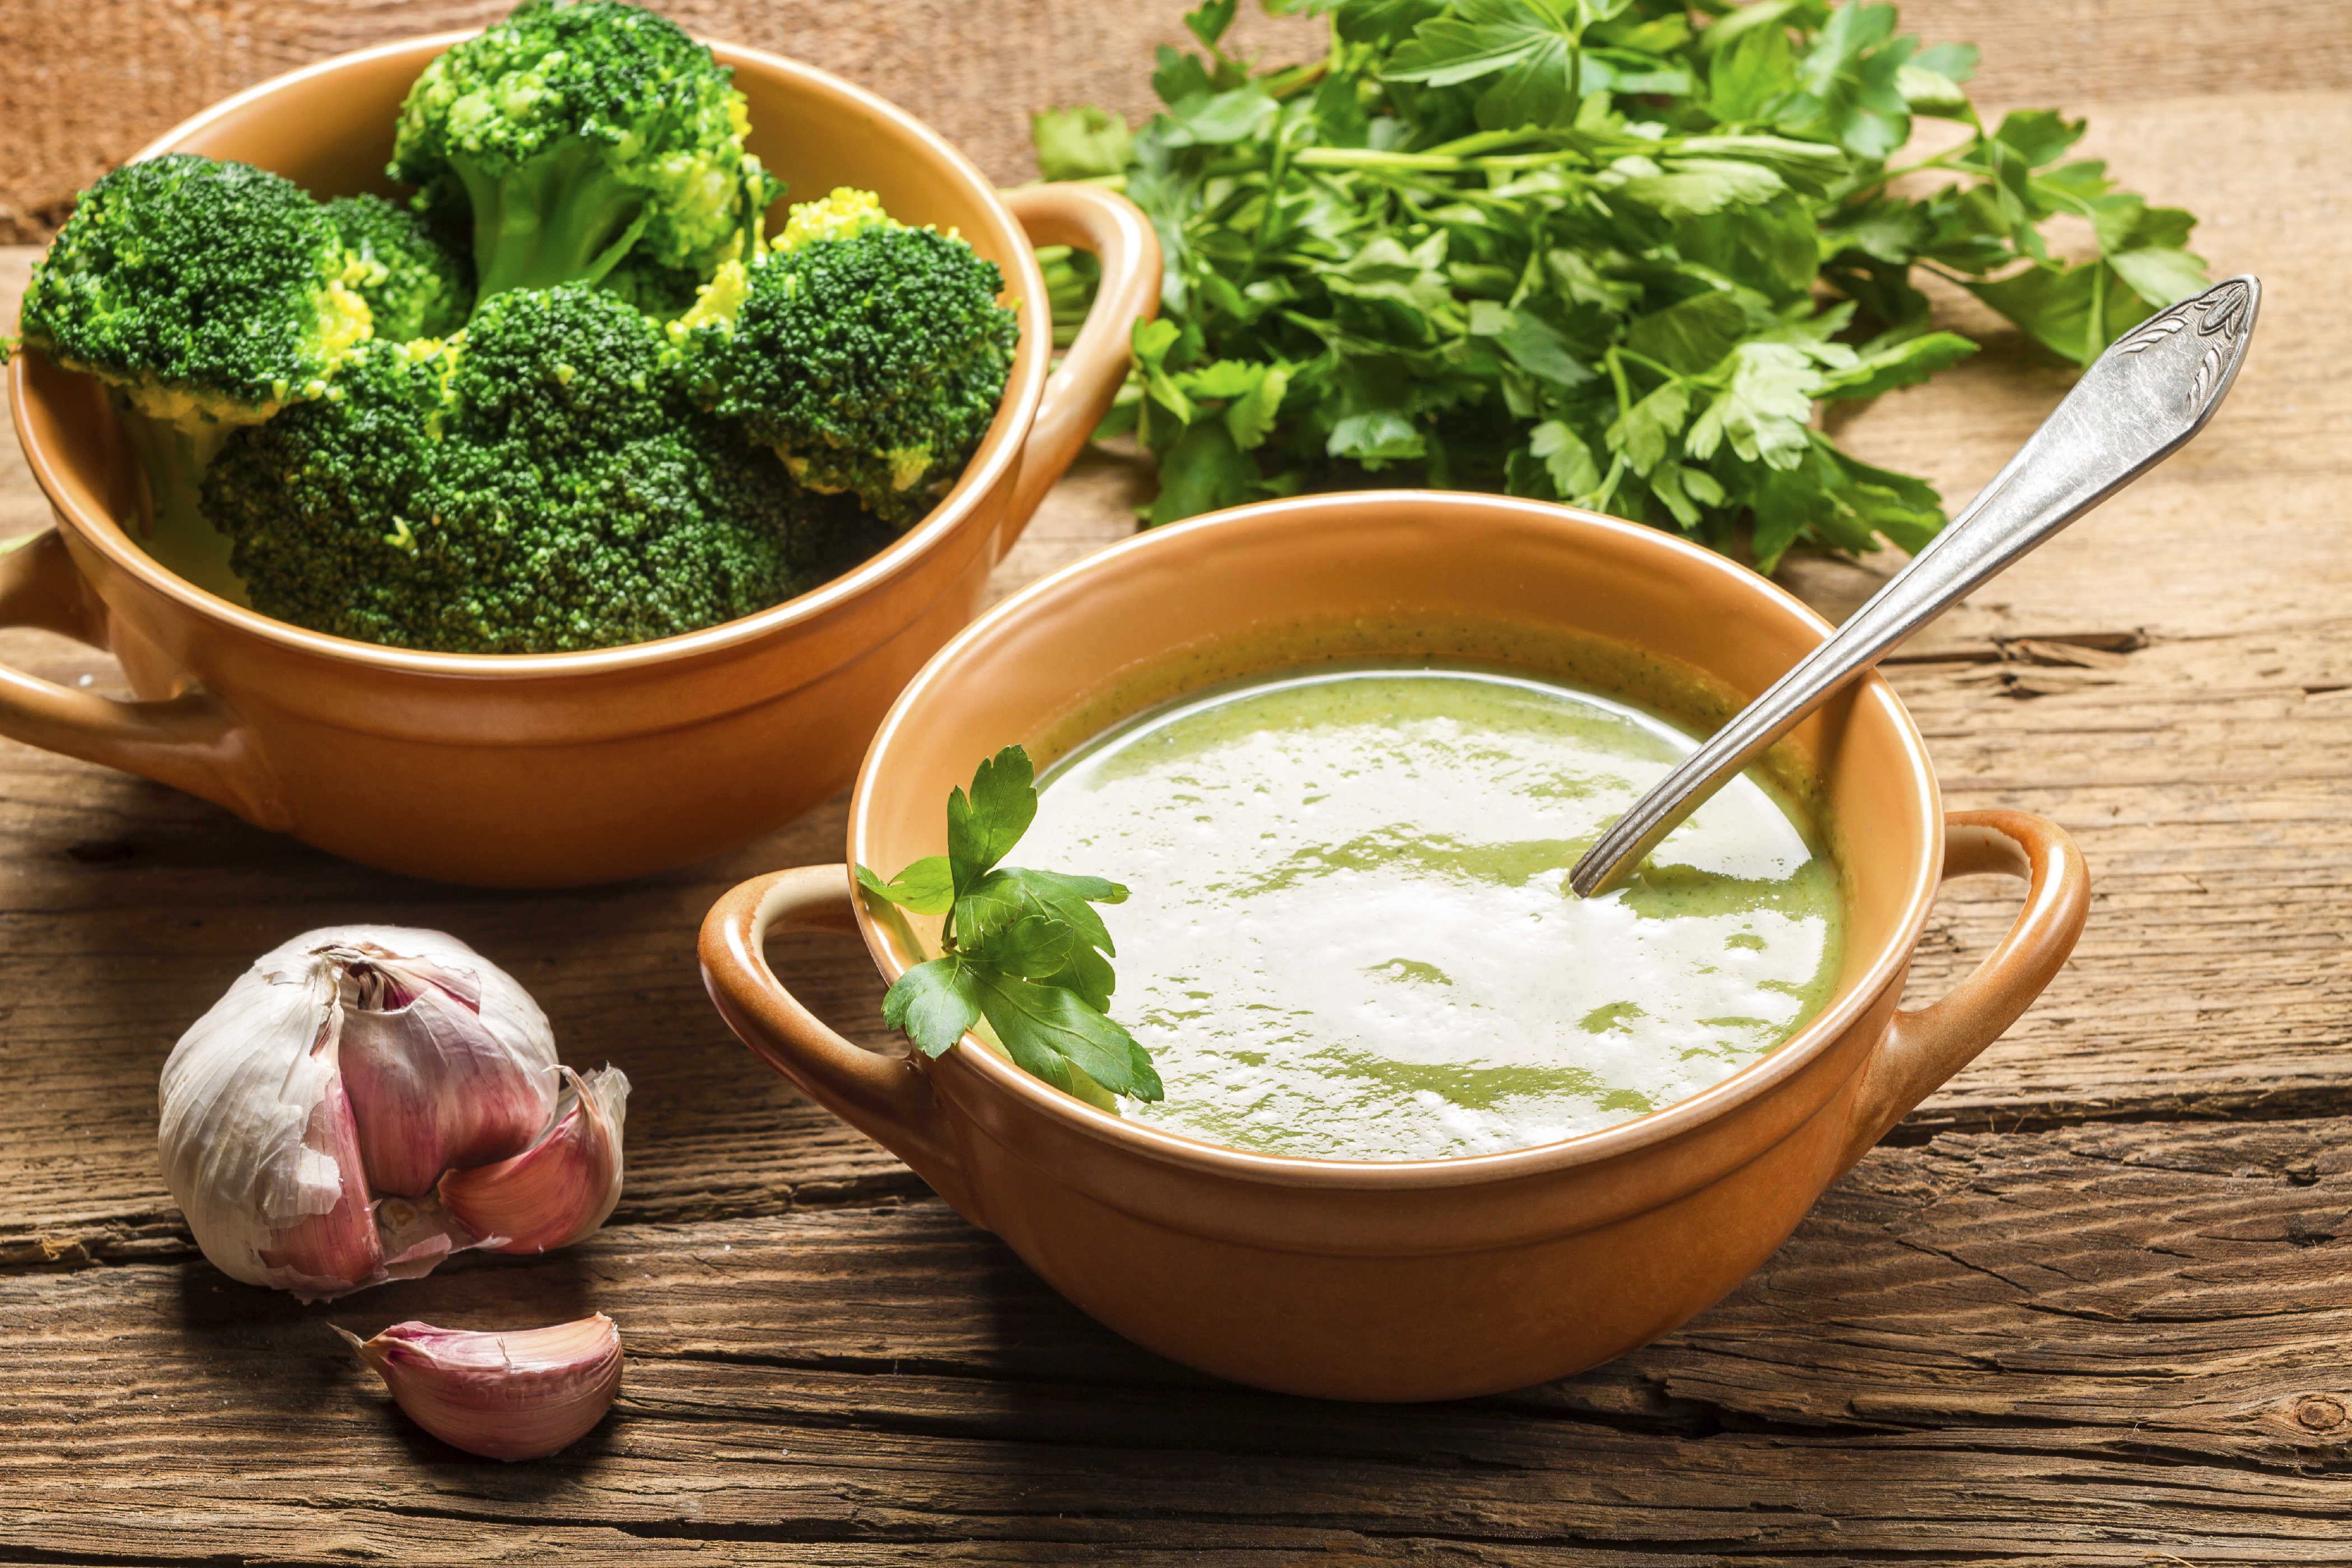 What can you substitute for broccoli in creamy broccoli soup?